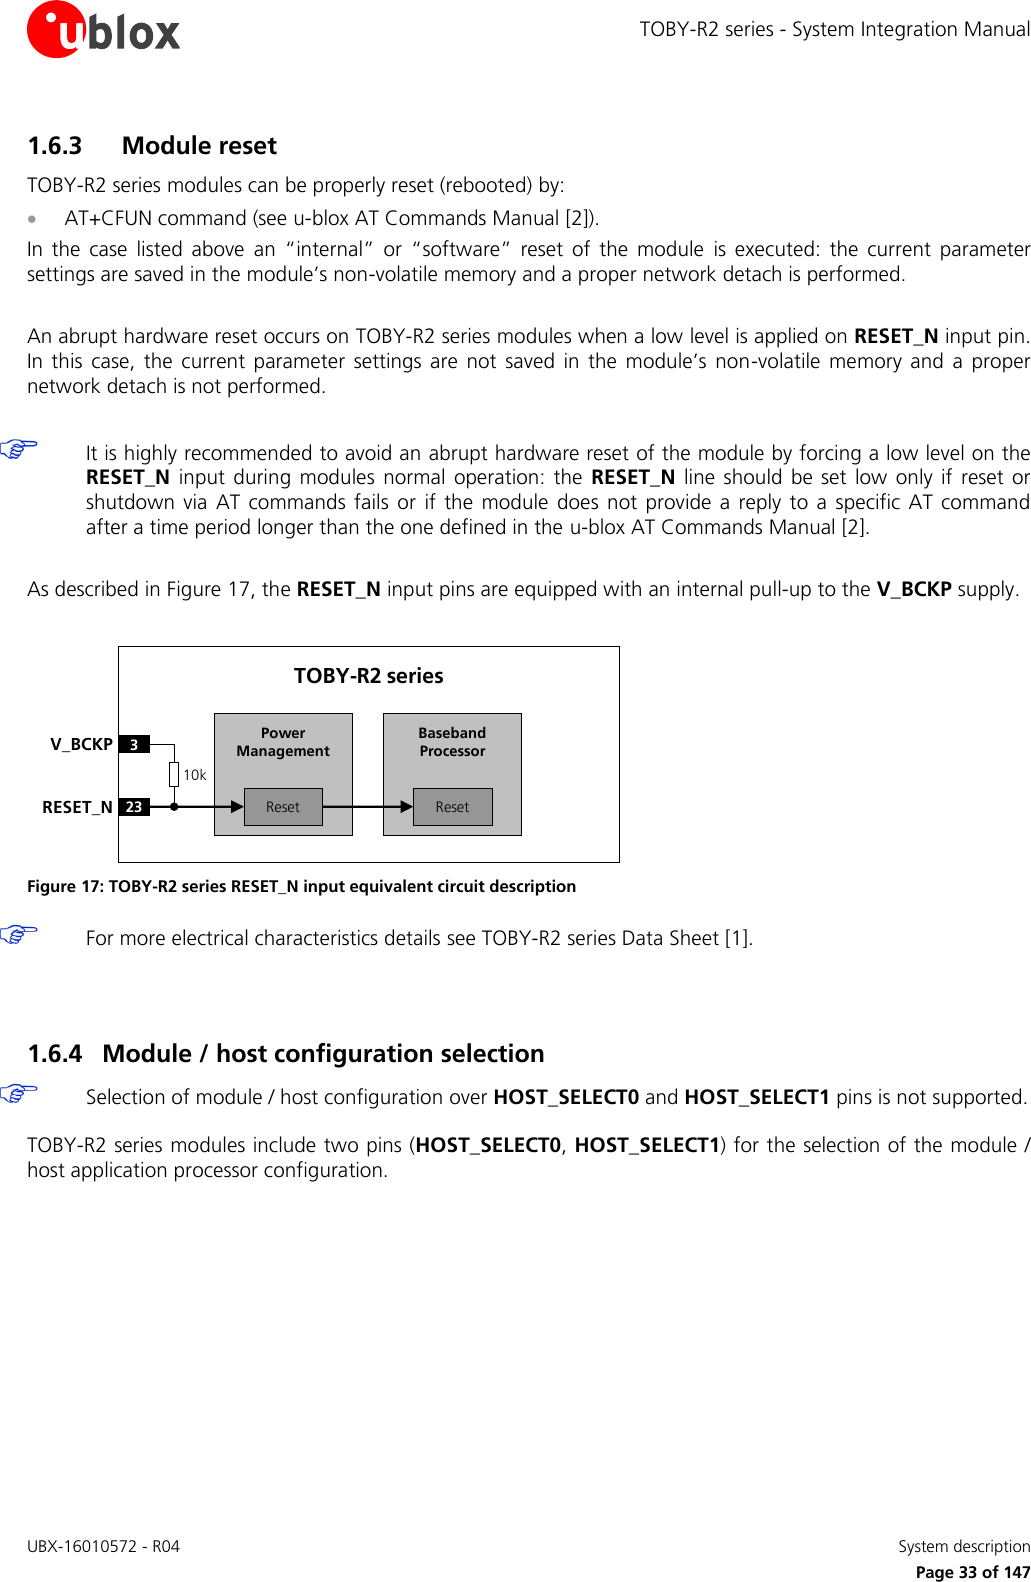 TOBY-R2 series - System Integration Manual UBX-16010572 - R04    System description     Page 33 of 147 1.6.3 Module reset TOBY-R2 series modules can be properly reset (rebooted) by:  AT+CFUN command (see u-blox AT Commands Manual [2]). In  the  case  listed  above  an  “internal”  or  “software”  reset  of  the  module  is  executed:  the  current  parameter settings are saved in the module’s non-volatile memory and a proper network detach is performed.  An abrupt hardware reset occurs on TOBY-R2 series modules when a low level is applied on RESET_N input pin. In  this  case,  the  current  parameter  settings are  not  saved  in the  module’s  non-volatile  memory  and  a  proper network detach is not performed.   It is highly recommended to avoid an abrupt hardware reset of the module by forcing a low level on the RESET_N  input during  modules  normal operation:  the  RESET_N  line  should  be  set  low only  if reset  or shutdown  via AT  commands  fails  or  if the  module  does  not provide a reply  to  a  specific  AT command after a time period longer than the one defined in the u-blox AT Commands Manual [2].  As described in Figure 17, the RESET_N input pins are equipped with an internal pull-up to the V_BCKP supply.  Baseband Processor23RESET_NTOBY-R2 series3V_BCKPResetPower ManagementReset10k Figure 17: TOBY-R2 series RESET_N input equivalent circuit description  For more electrical characteristics details see TOBY-R2 series Data Sheet [1].   1.6.4 Module / host configuration selection  Selection of module / host configuration over HOST_SELECT0 and HOST_SELECT1 pins is not supported.  TOBY-R2 series modules include two pins (HOST_SELECT0, HOST_SELECT1) for the selection of the module / host application processor configuration.  